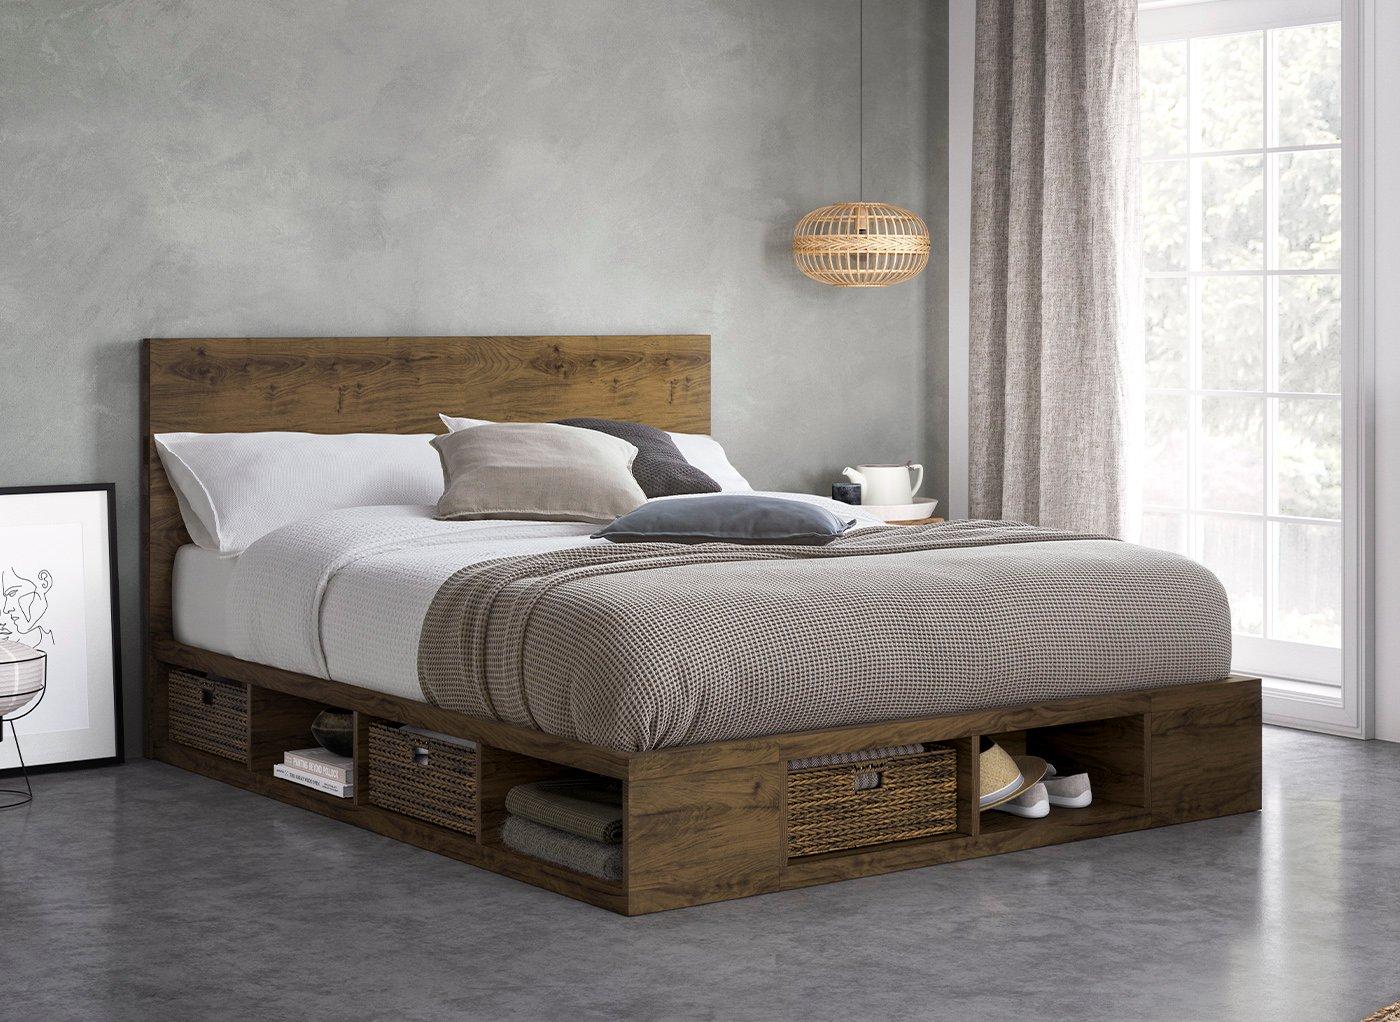 wooden bed frame with mattress